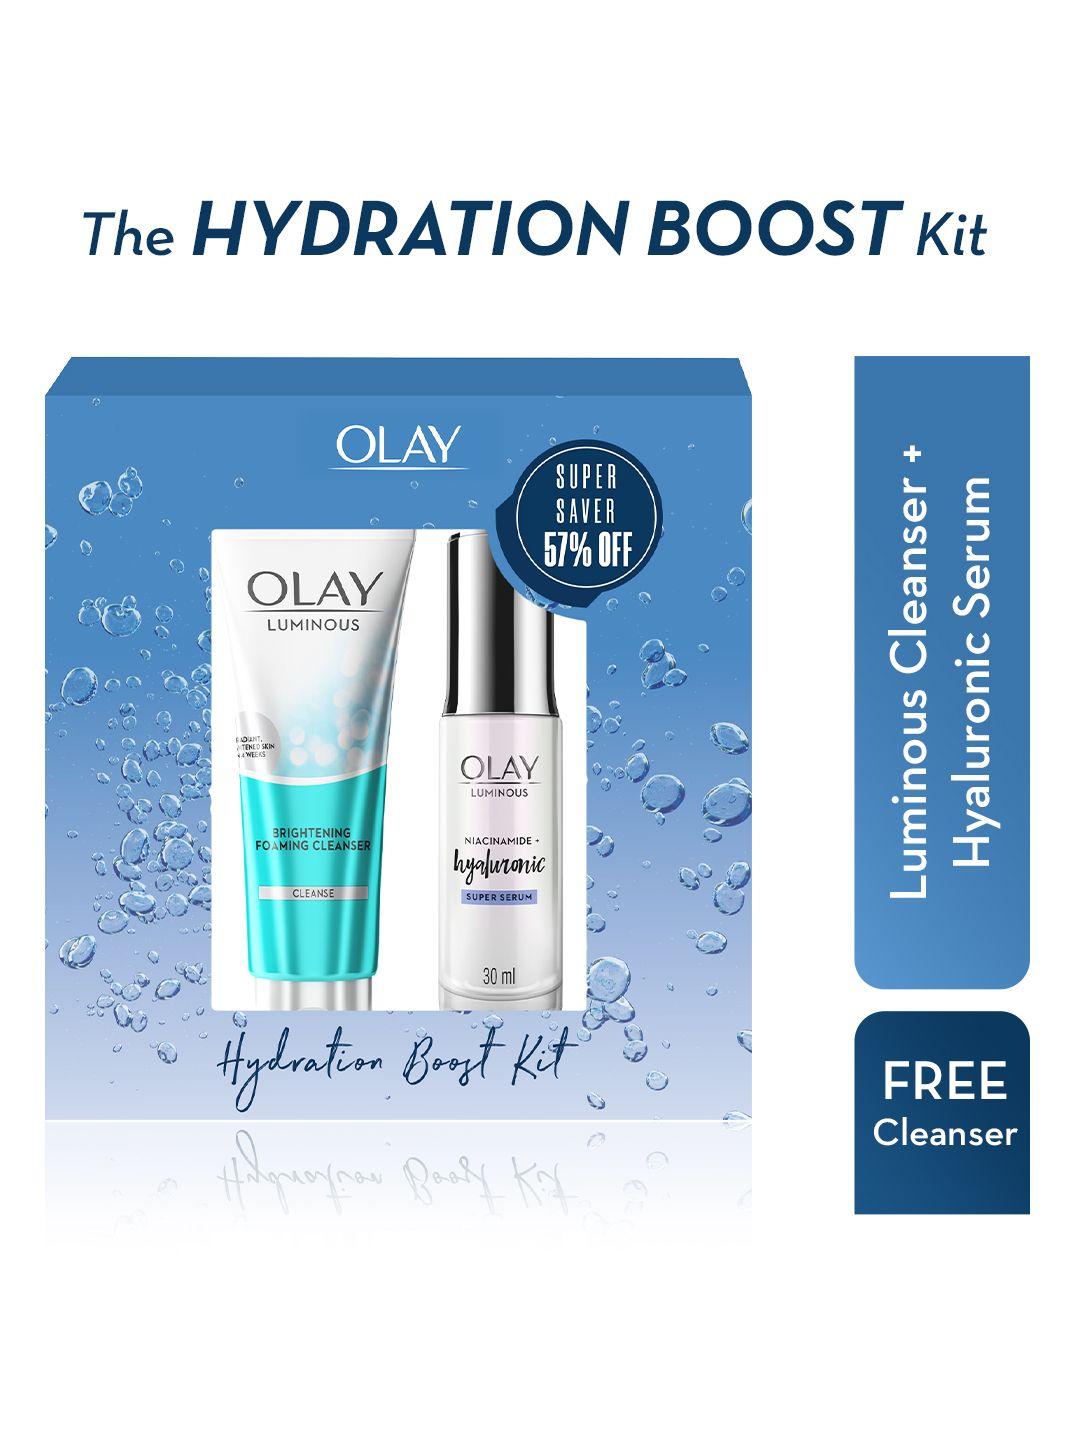 olay hydration boost kit for dewy glow - serum 30ml & foaming cleanser 100g